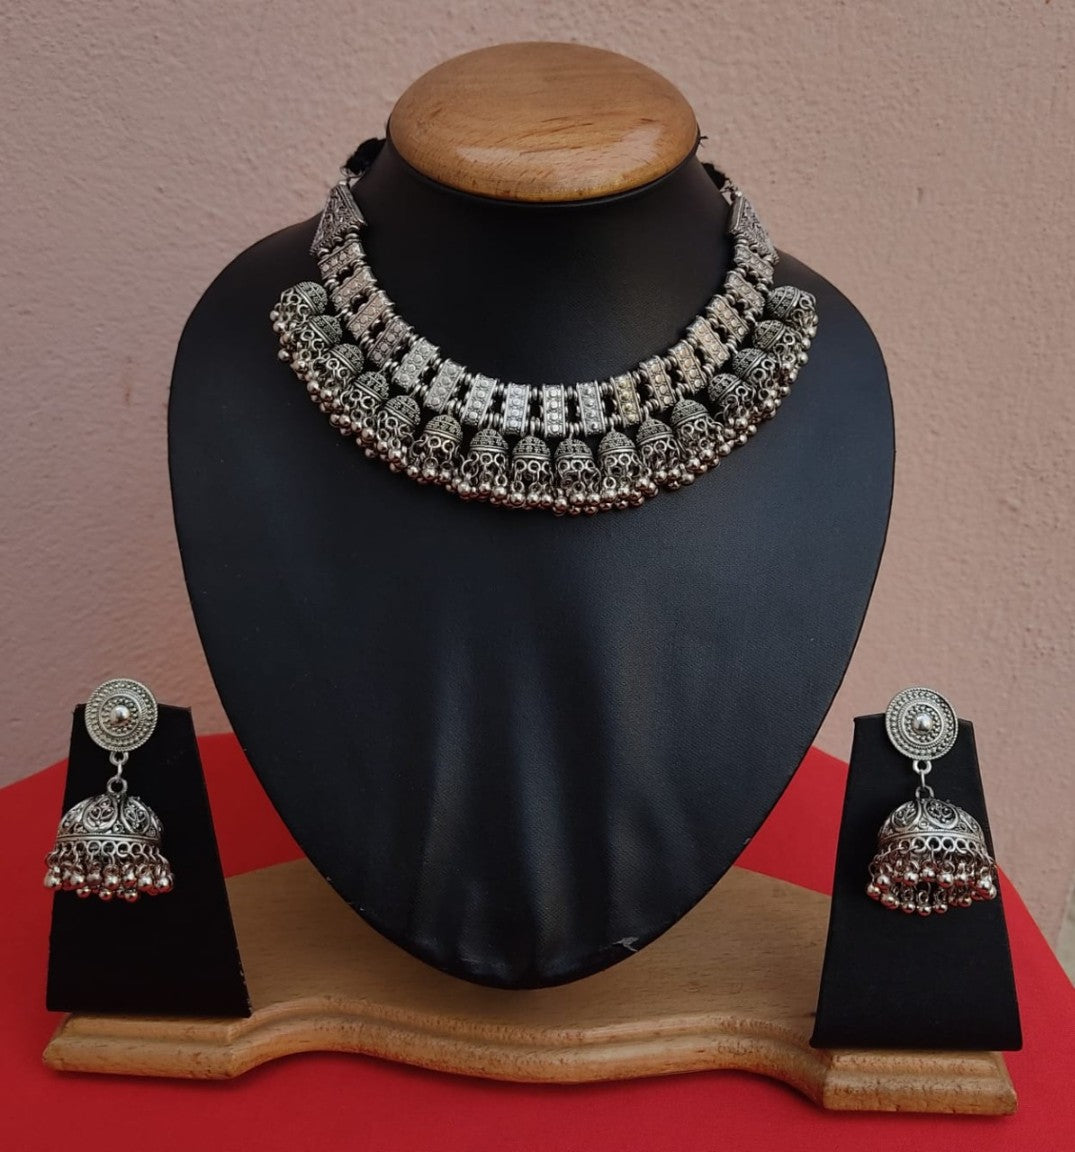 Series of bells - choker style necklace with earrings